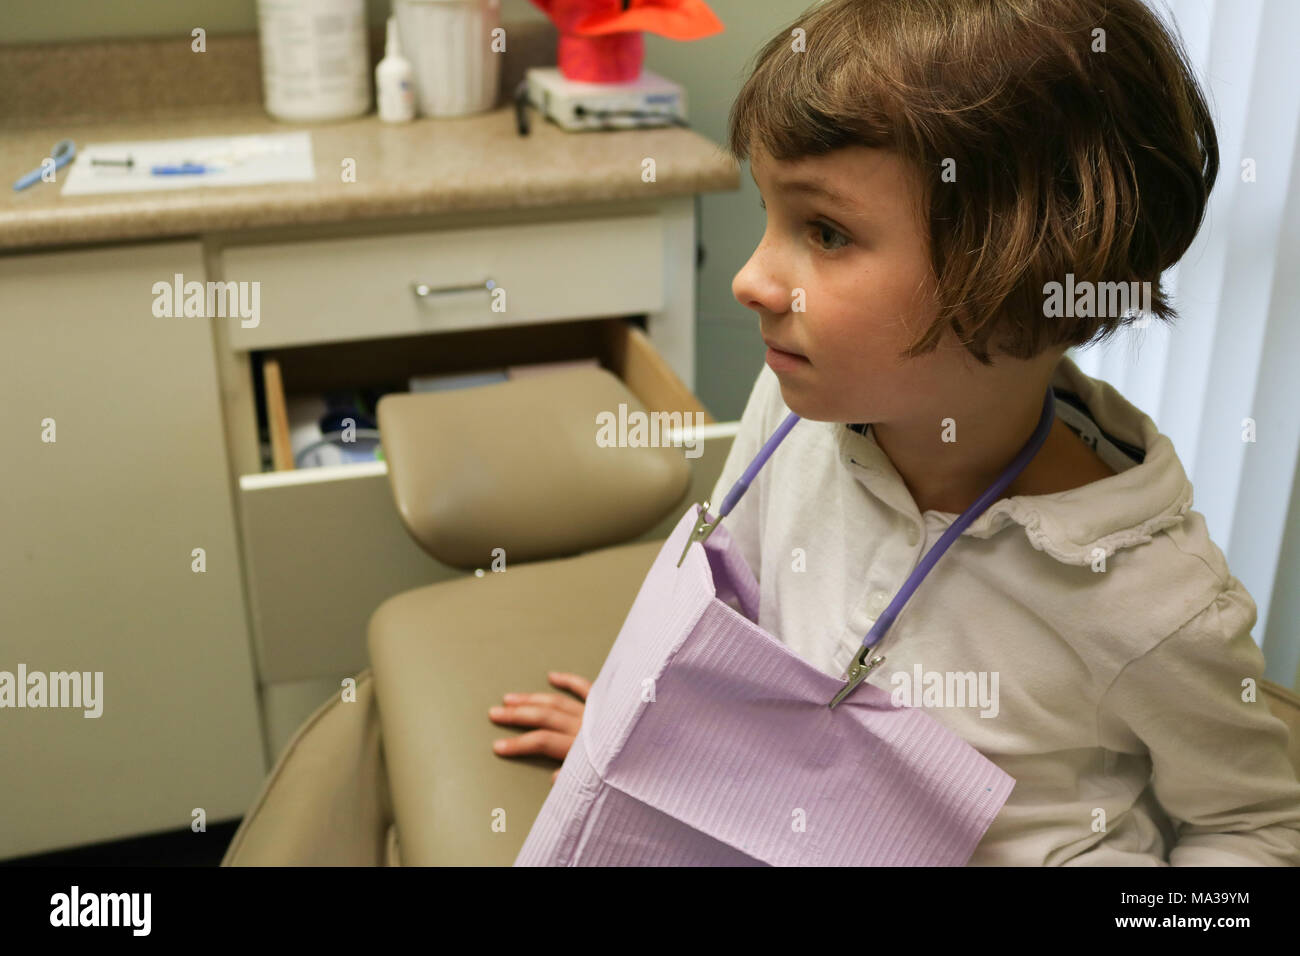 Young child at dental office Stock Photo